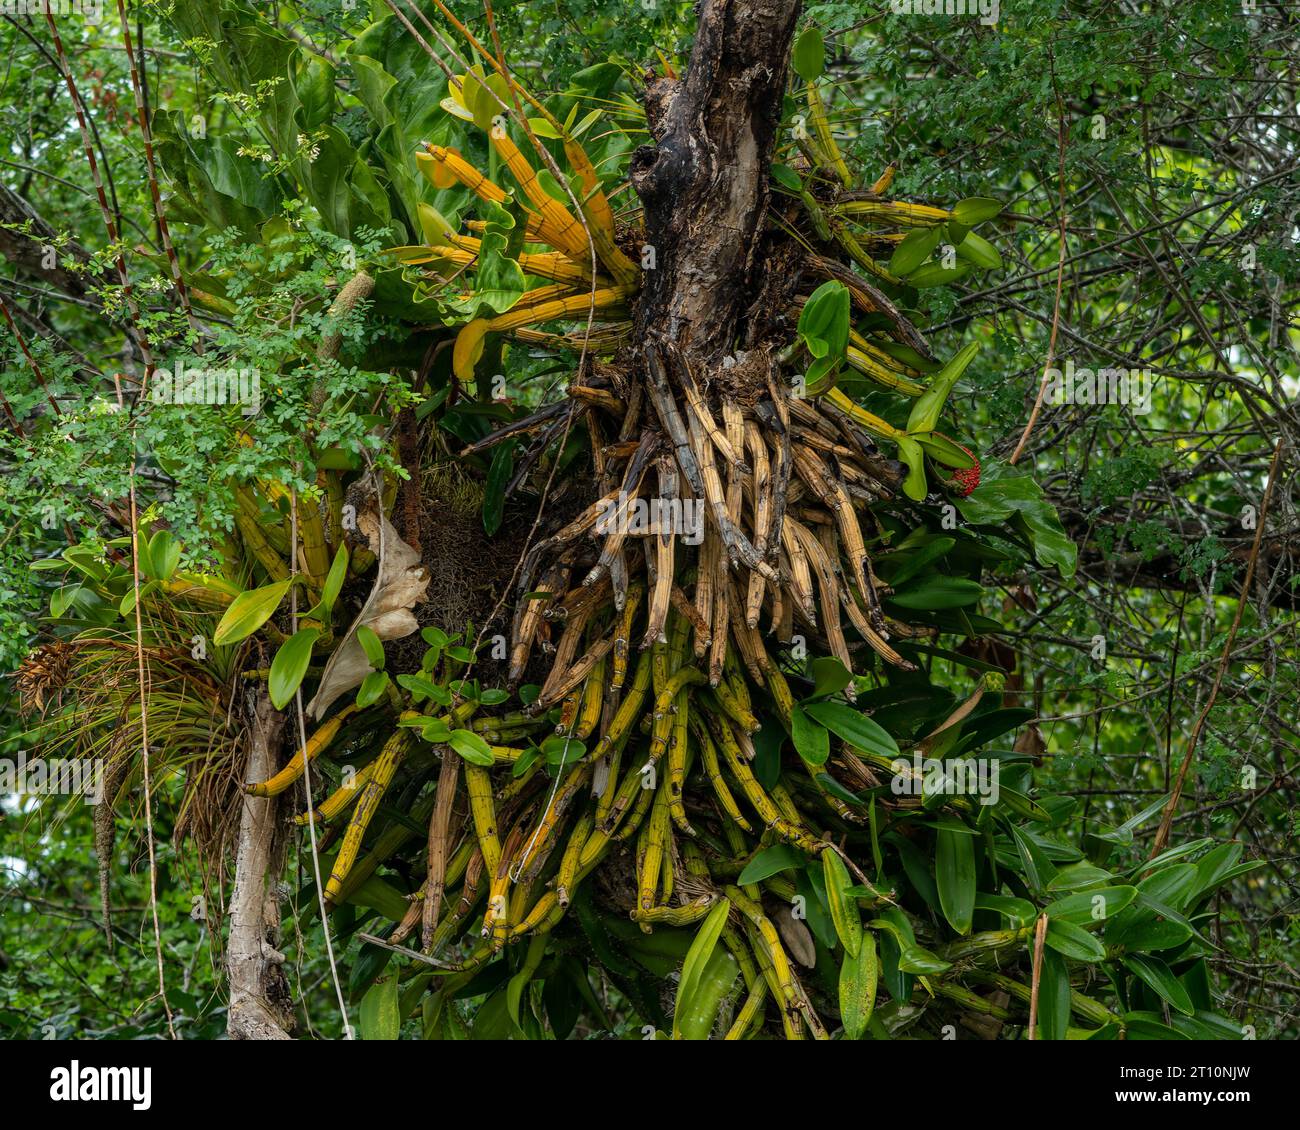 Pseudobulbs of the epiphytic orchid Myrmecophila christinae on a tree along the New River in the Orange Walk District of Belize. Stock Photo